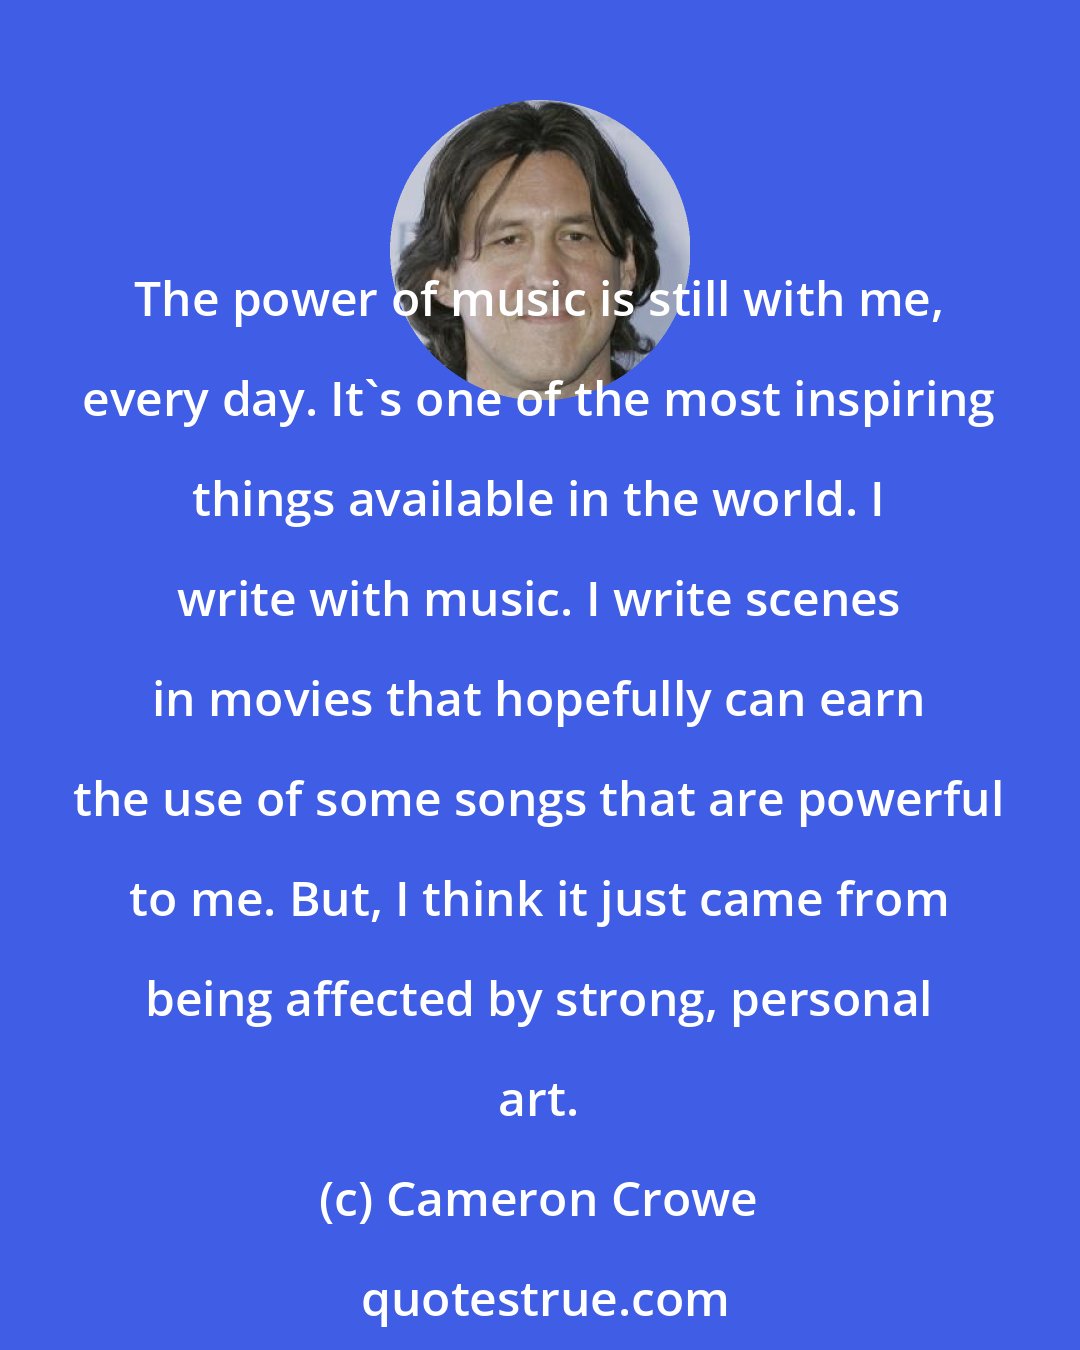 Cameron Crowe: The power of music is still with me, every day. It's one of the most inspiring things available in the world. I write with music. I write scenes in movies that hopefully can earn the use of some songs that are powerful to me. But, I think it just came from being affected by strong, personal art.